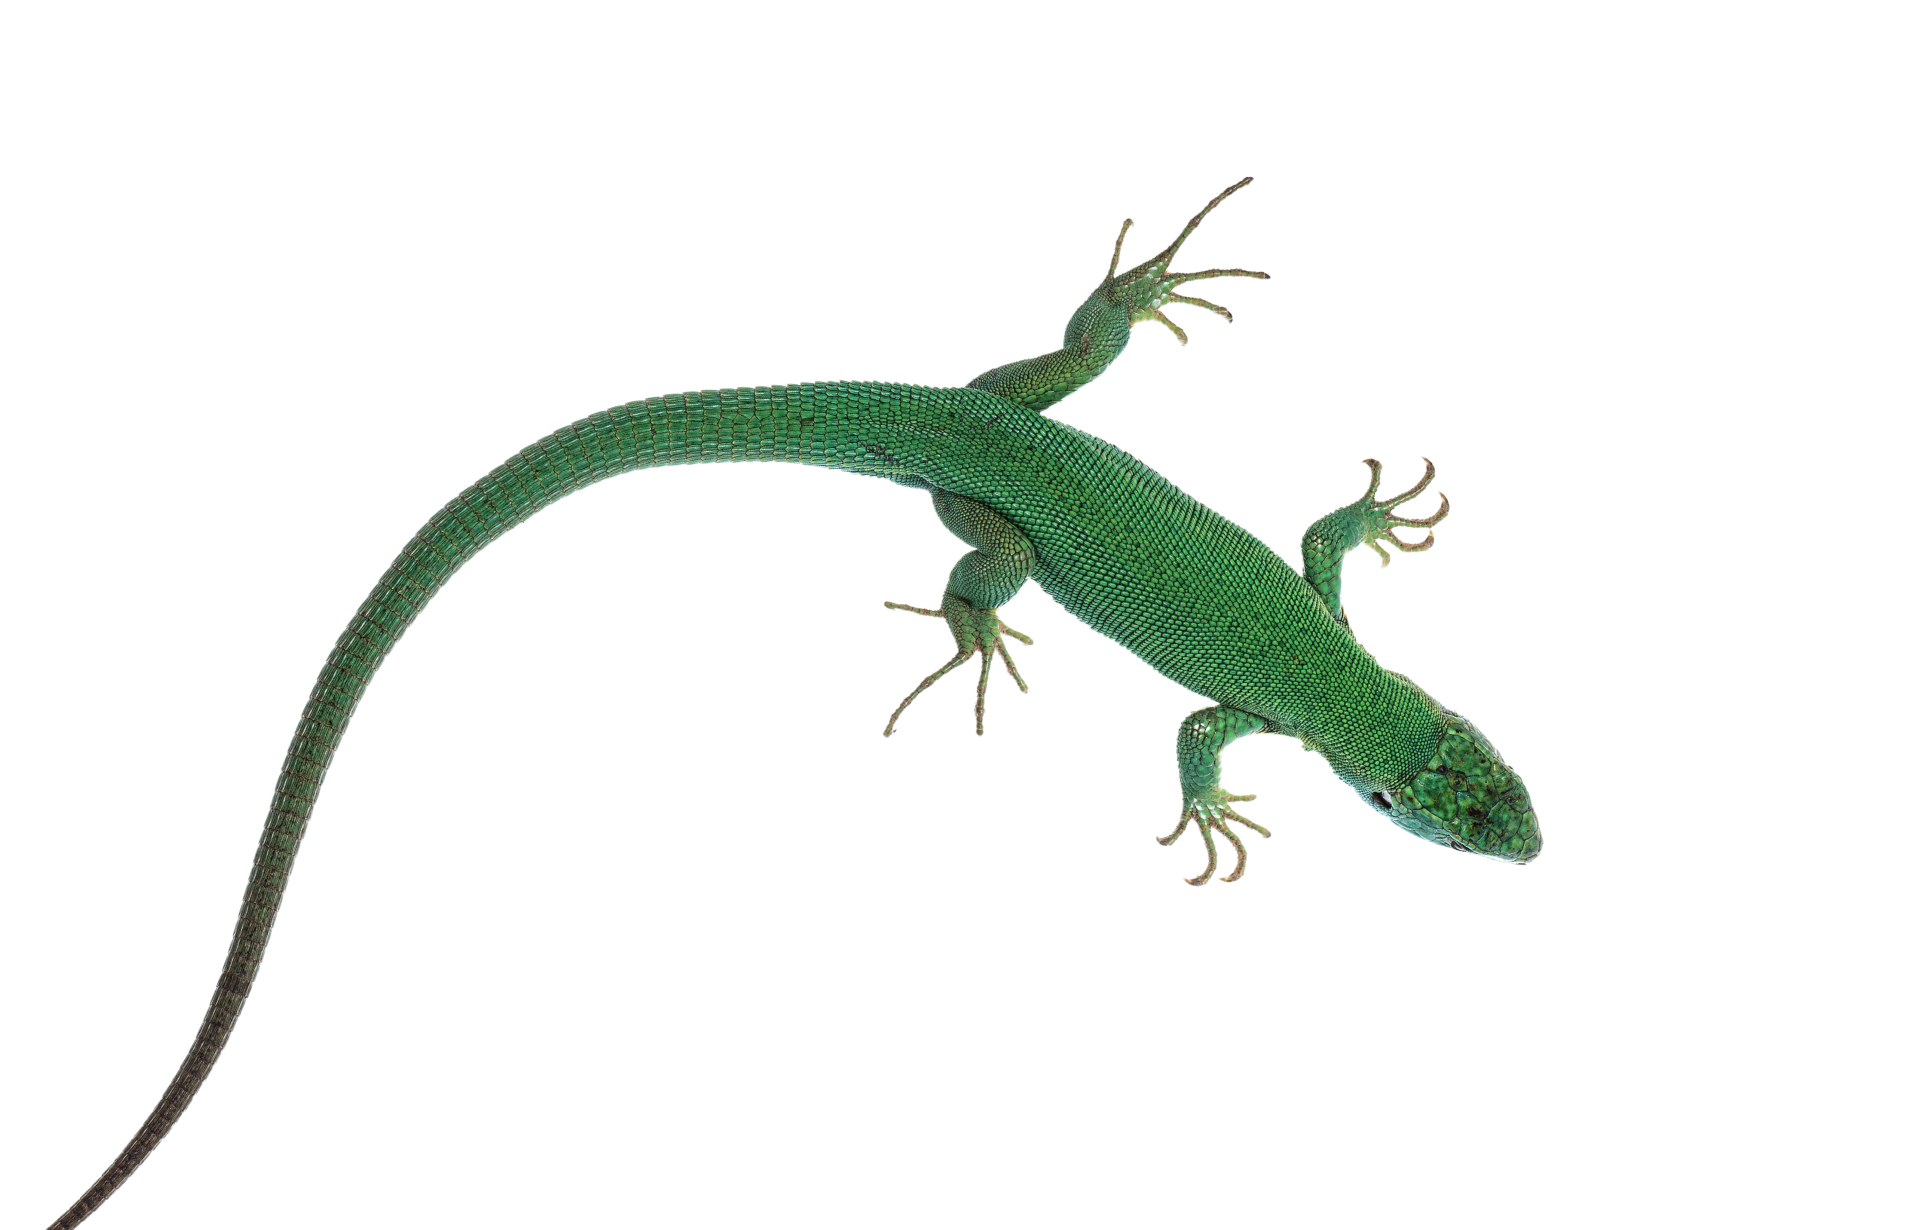 a green lizard is sitting on a white surface .